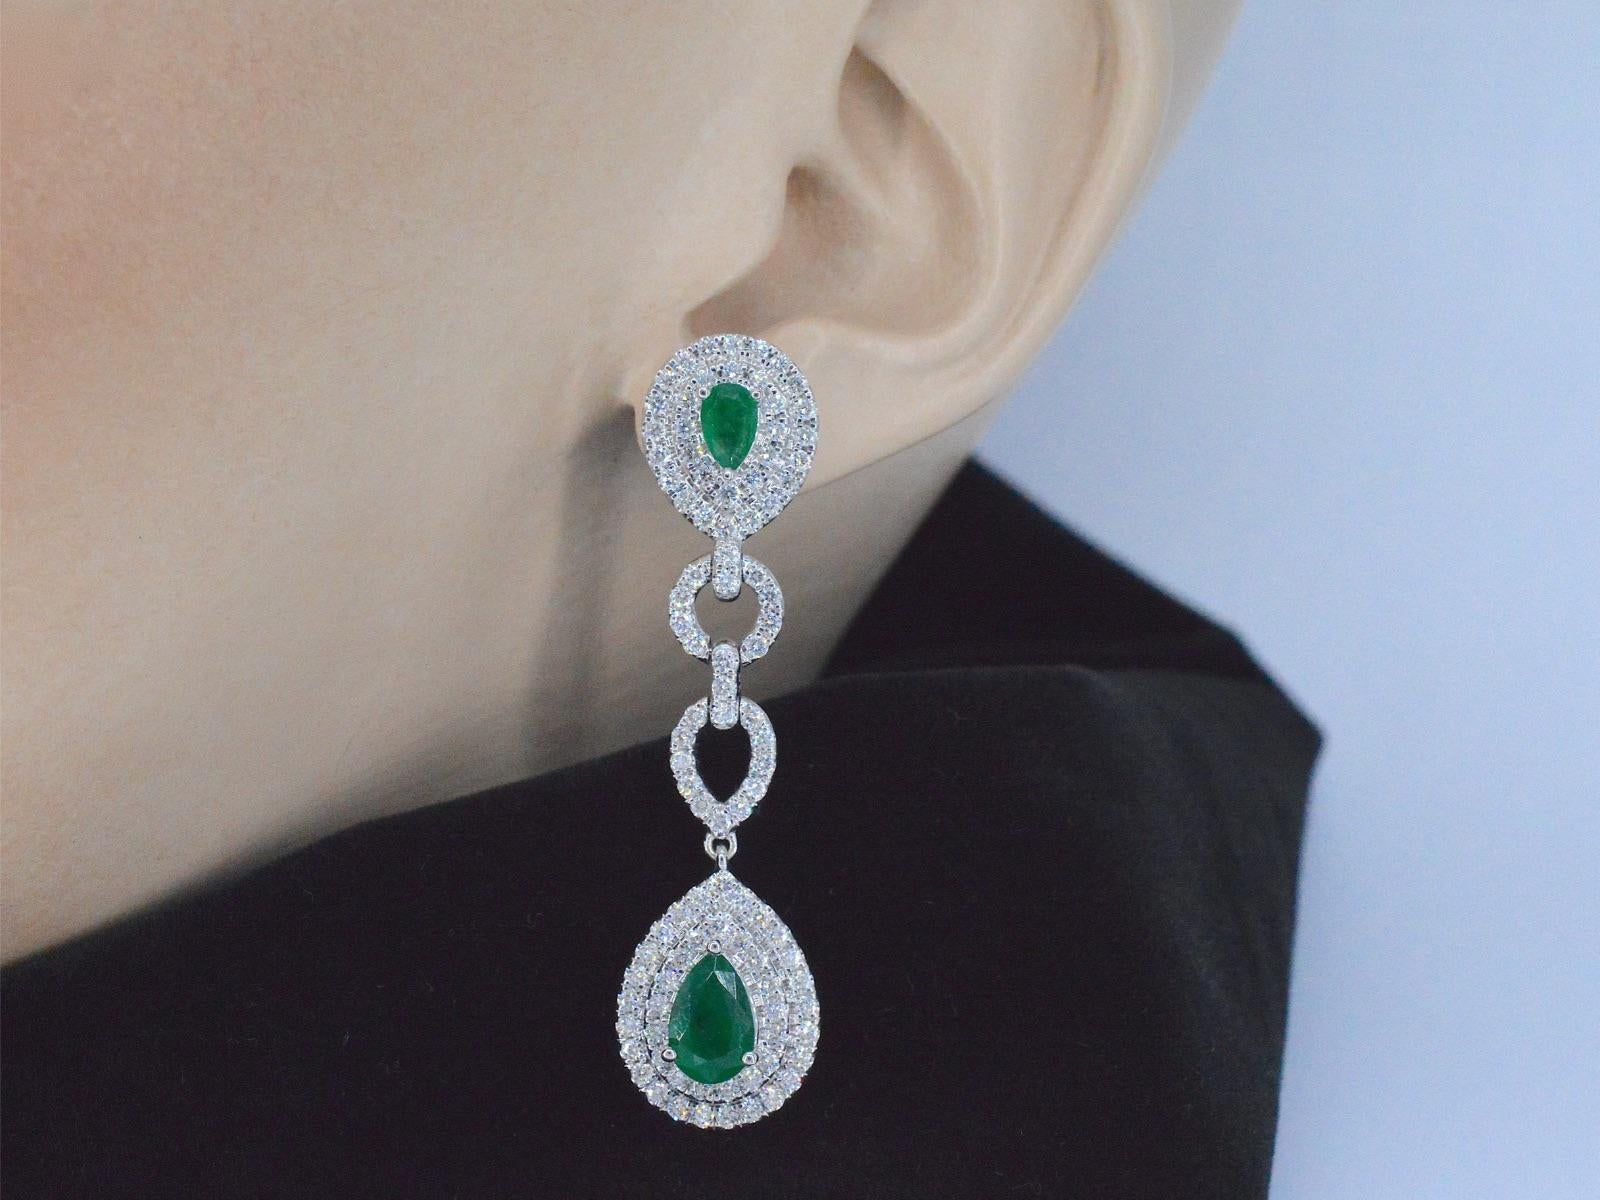 Diamonds; Weight: 3.00 carat; Cut: Brilliant; Colour: F-G; Purity: VS; Grinding quality: Very good; Gemstone: Emeralds; Grinding shape: drop shape; Weight: 4.00 carat; Color: intense green; Purity: with natural inclusions; Jewel: Earrings; Weight: